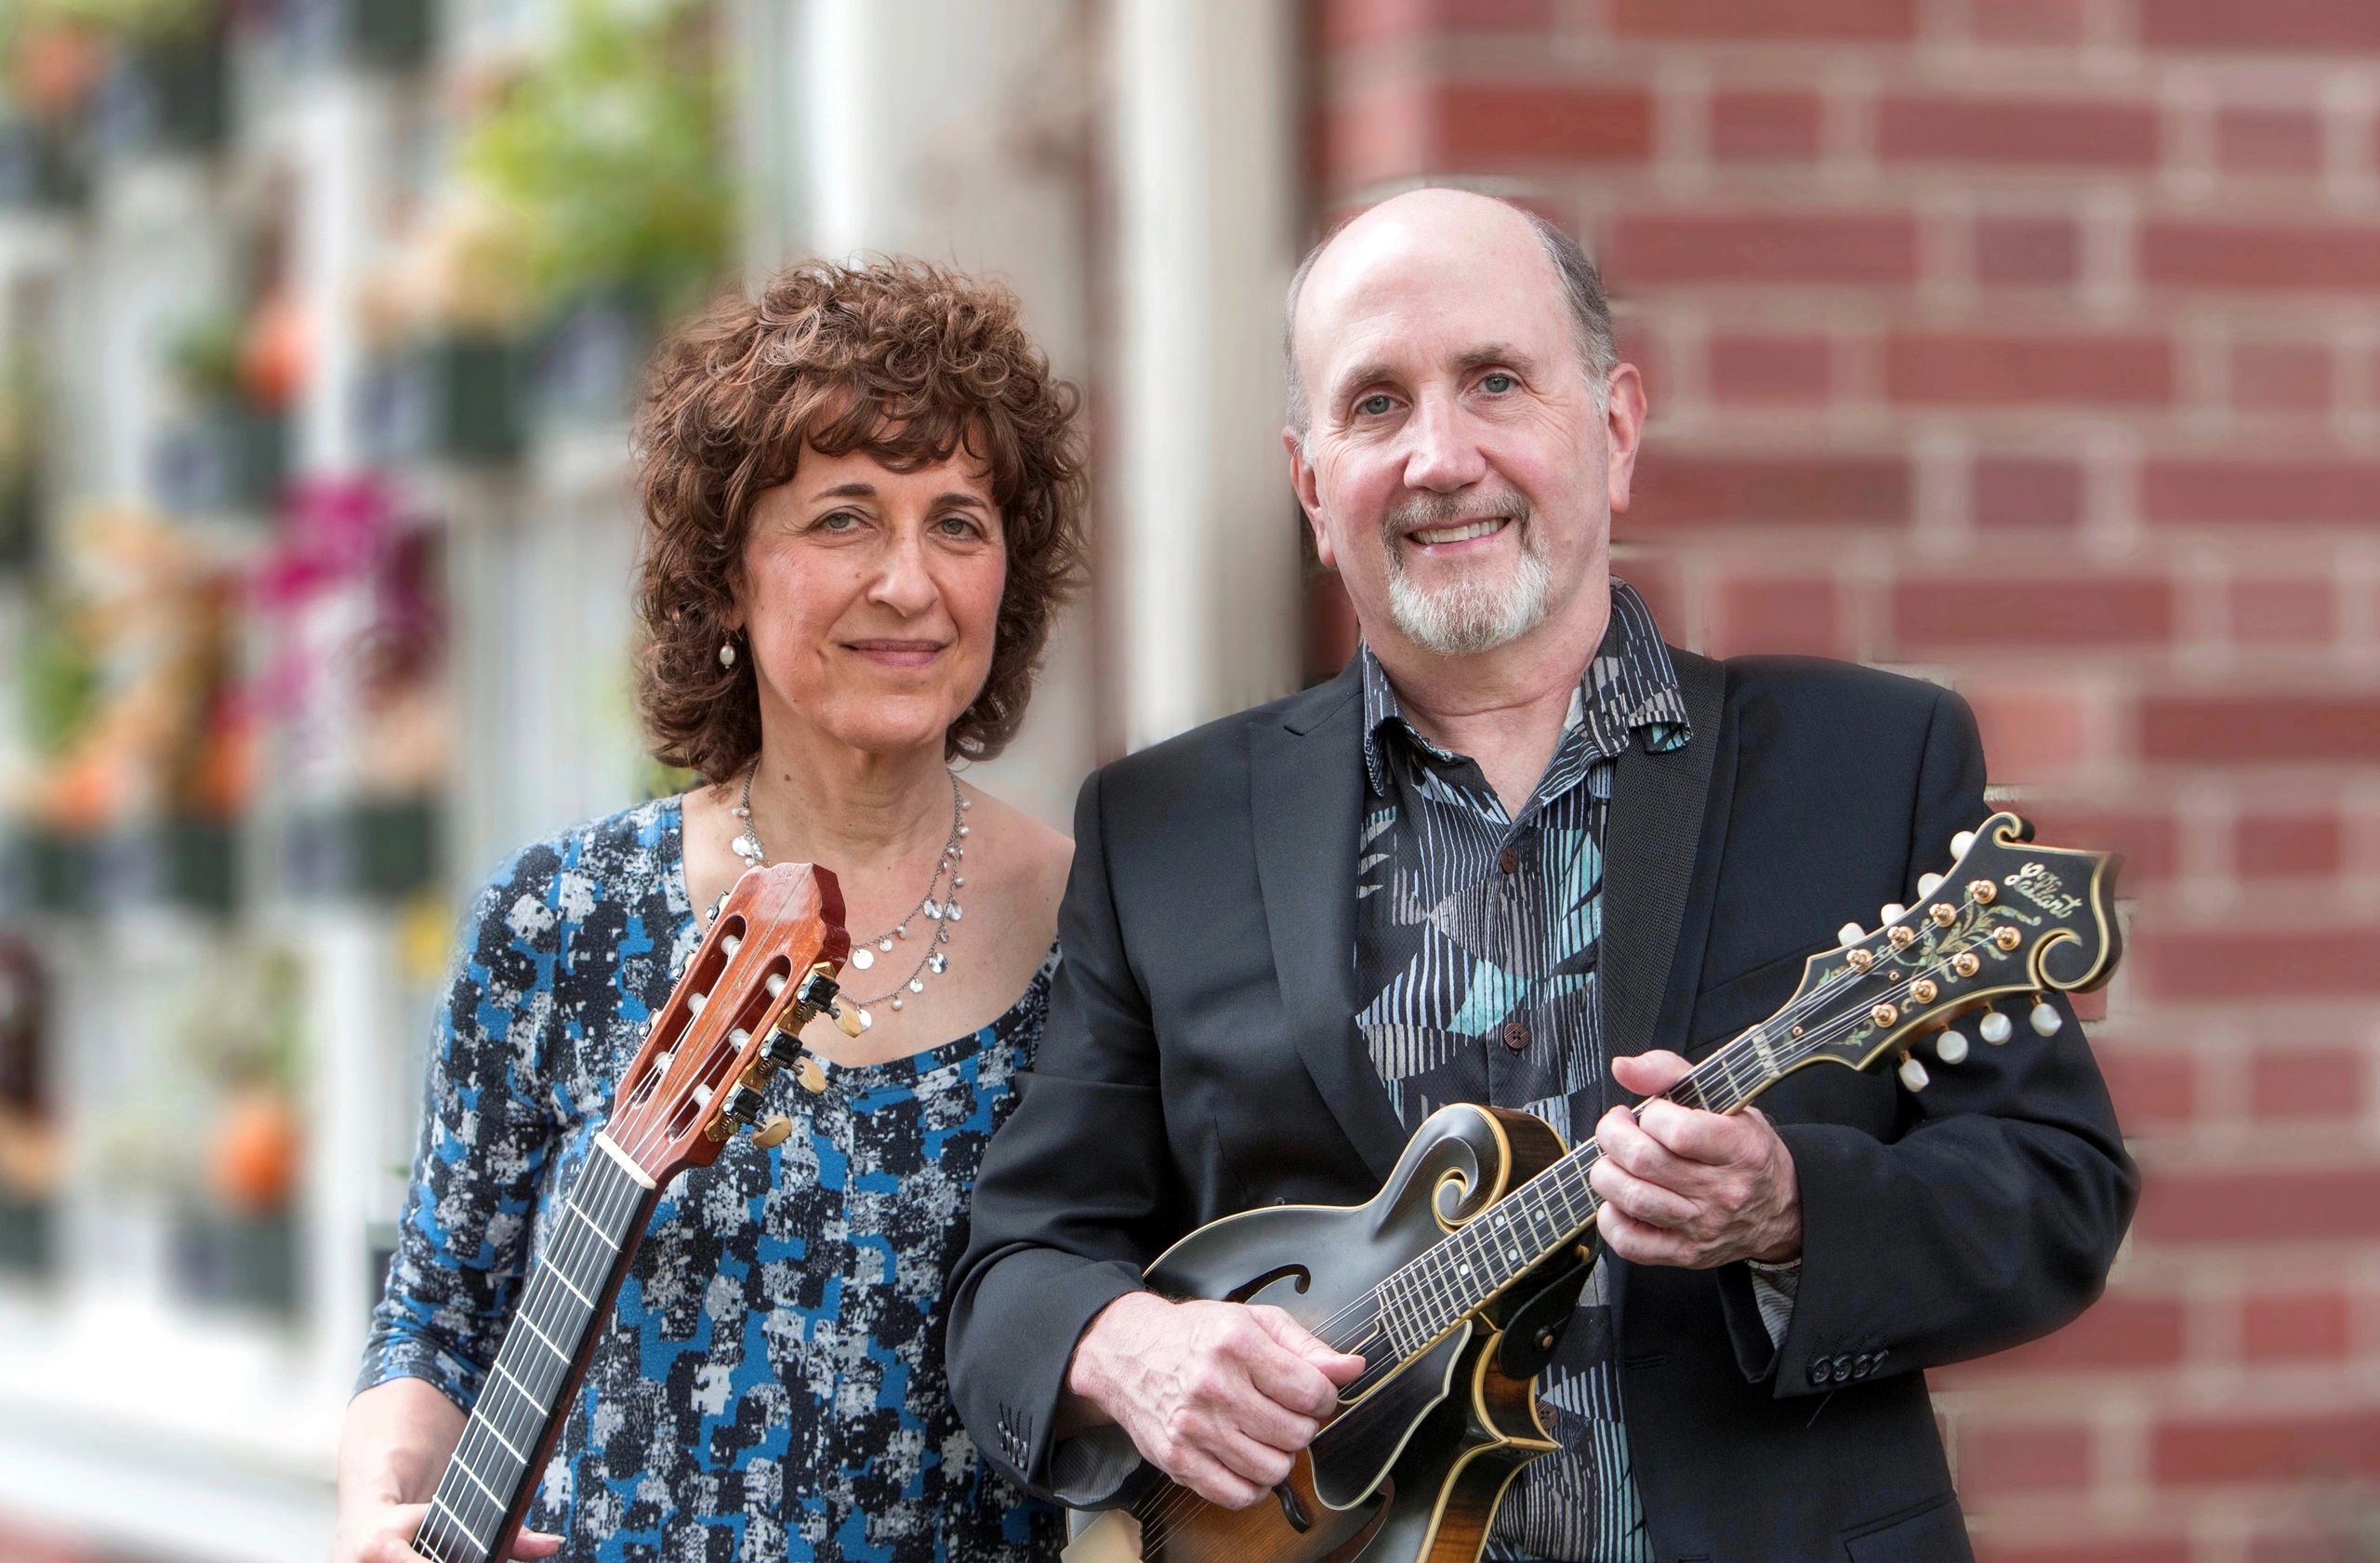  Husband and wife duo, Handler and Levesque have performed over 2,000 concerts together